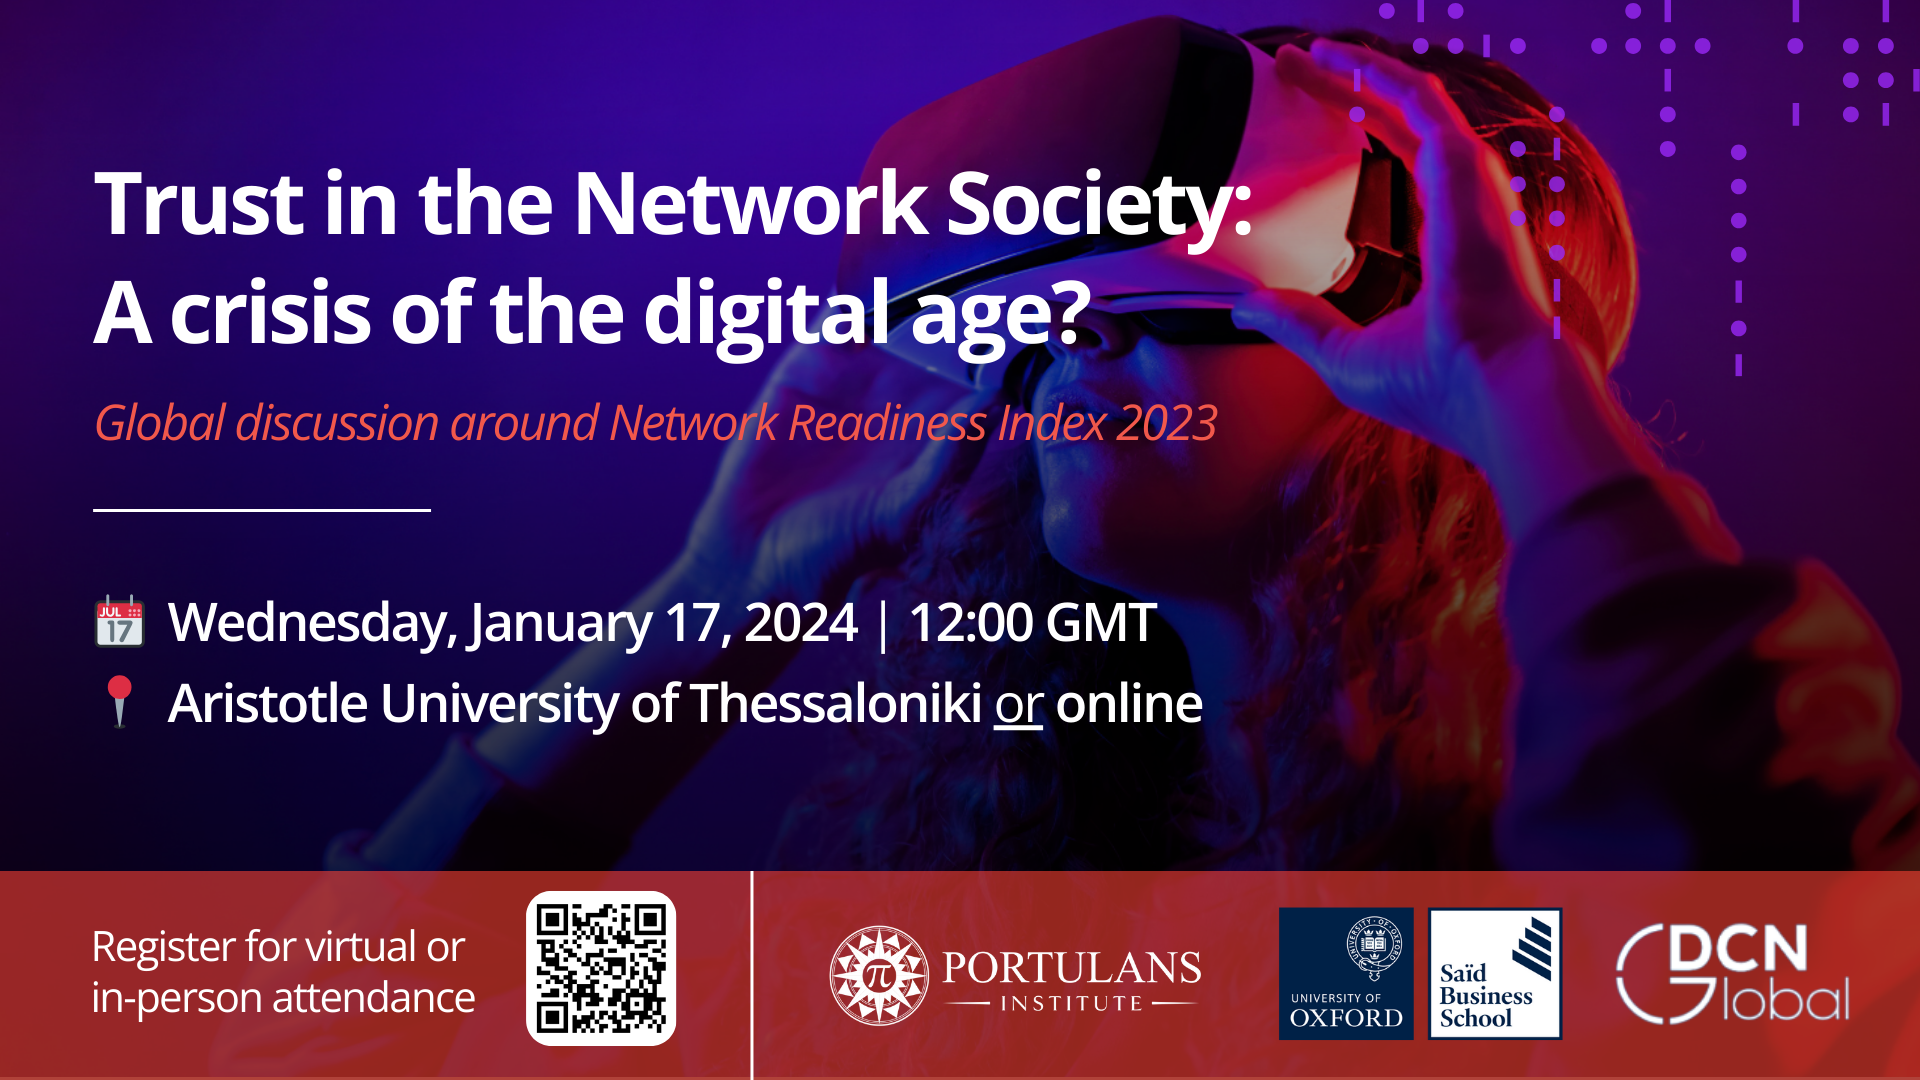 Trust in the Network Society: A crisis of the digital age?